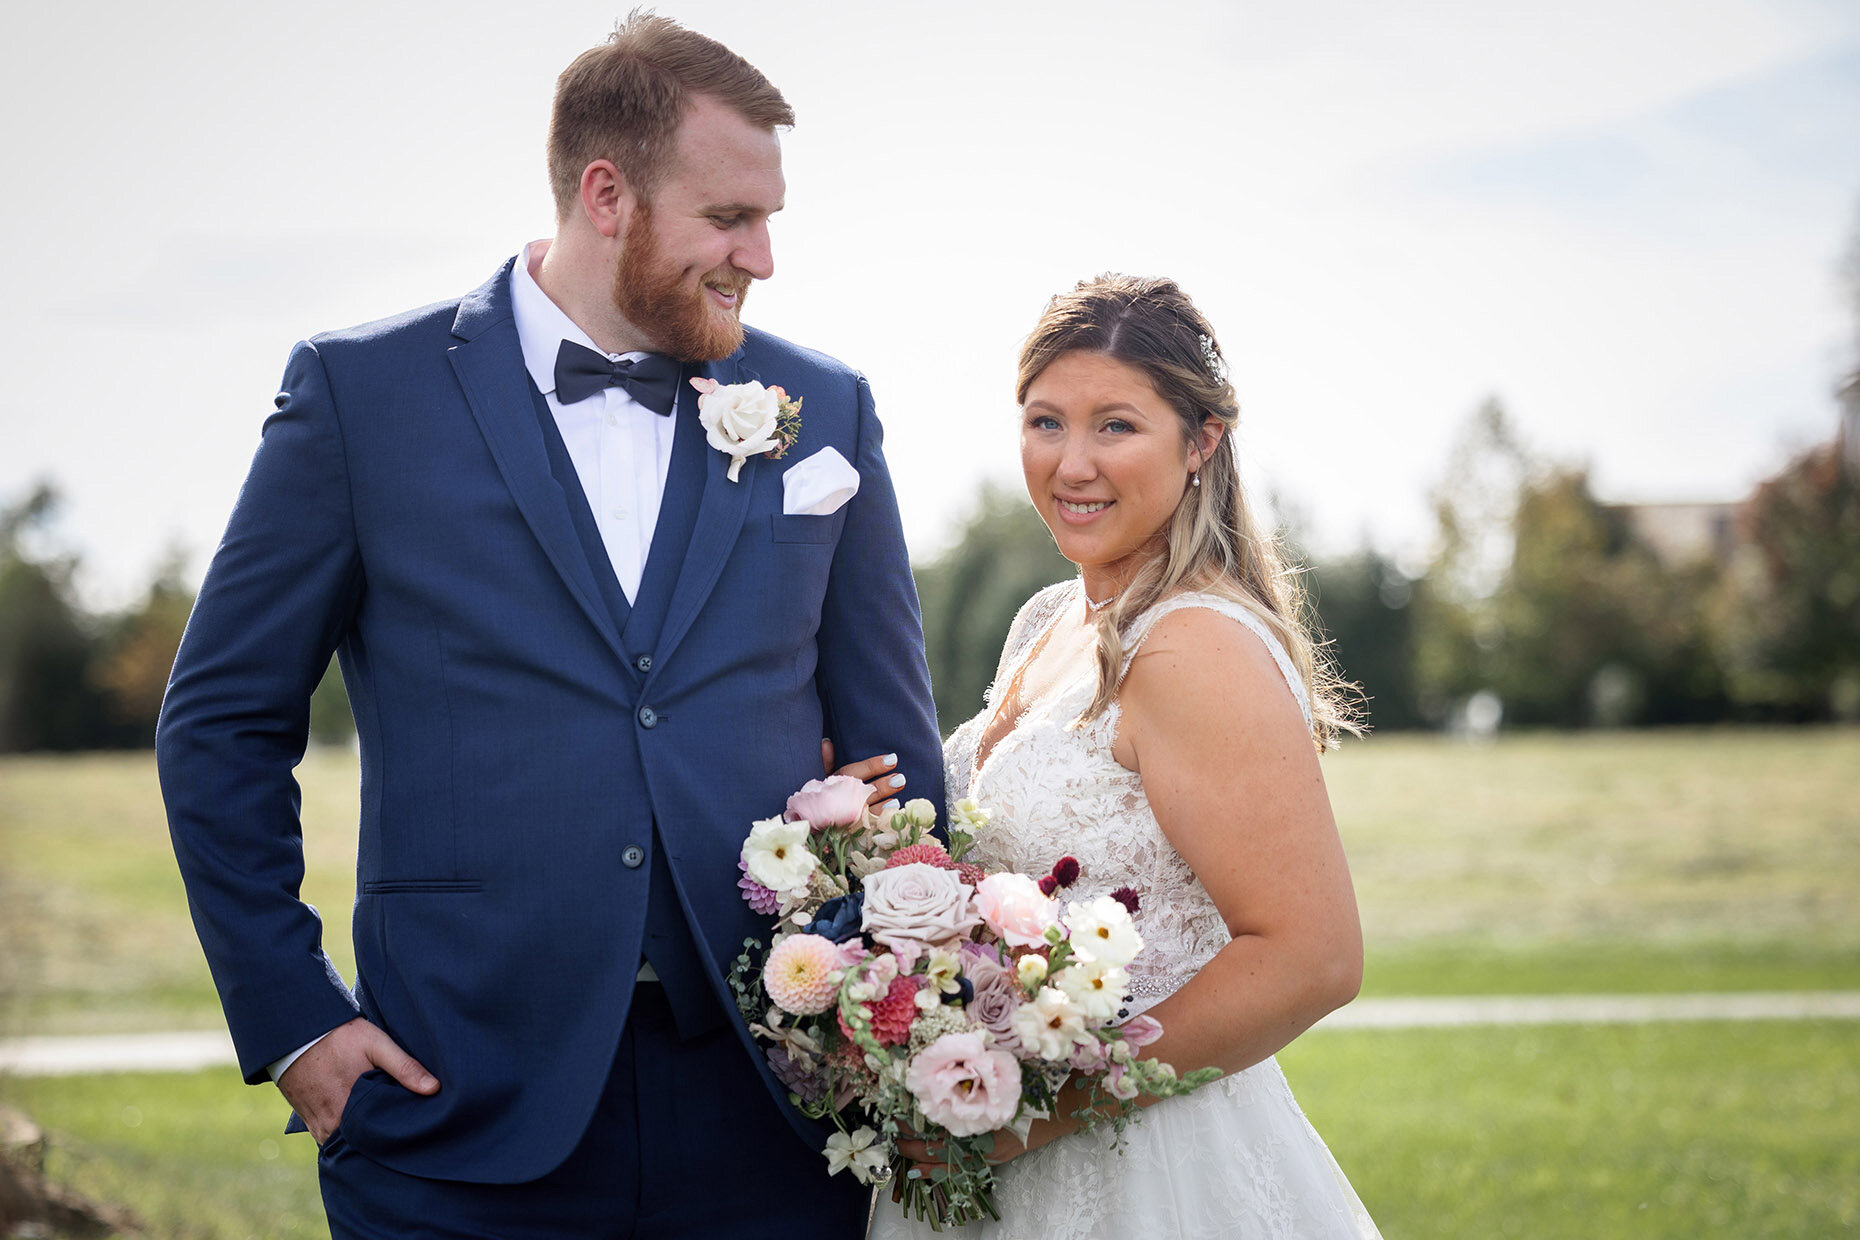 Candid Portrait of Bride and Groom in Field